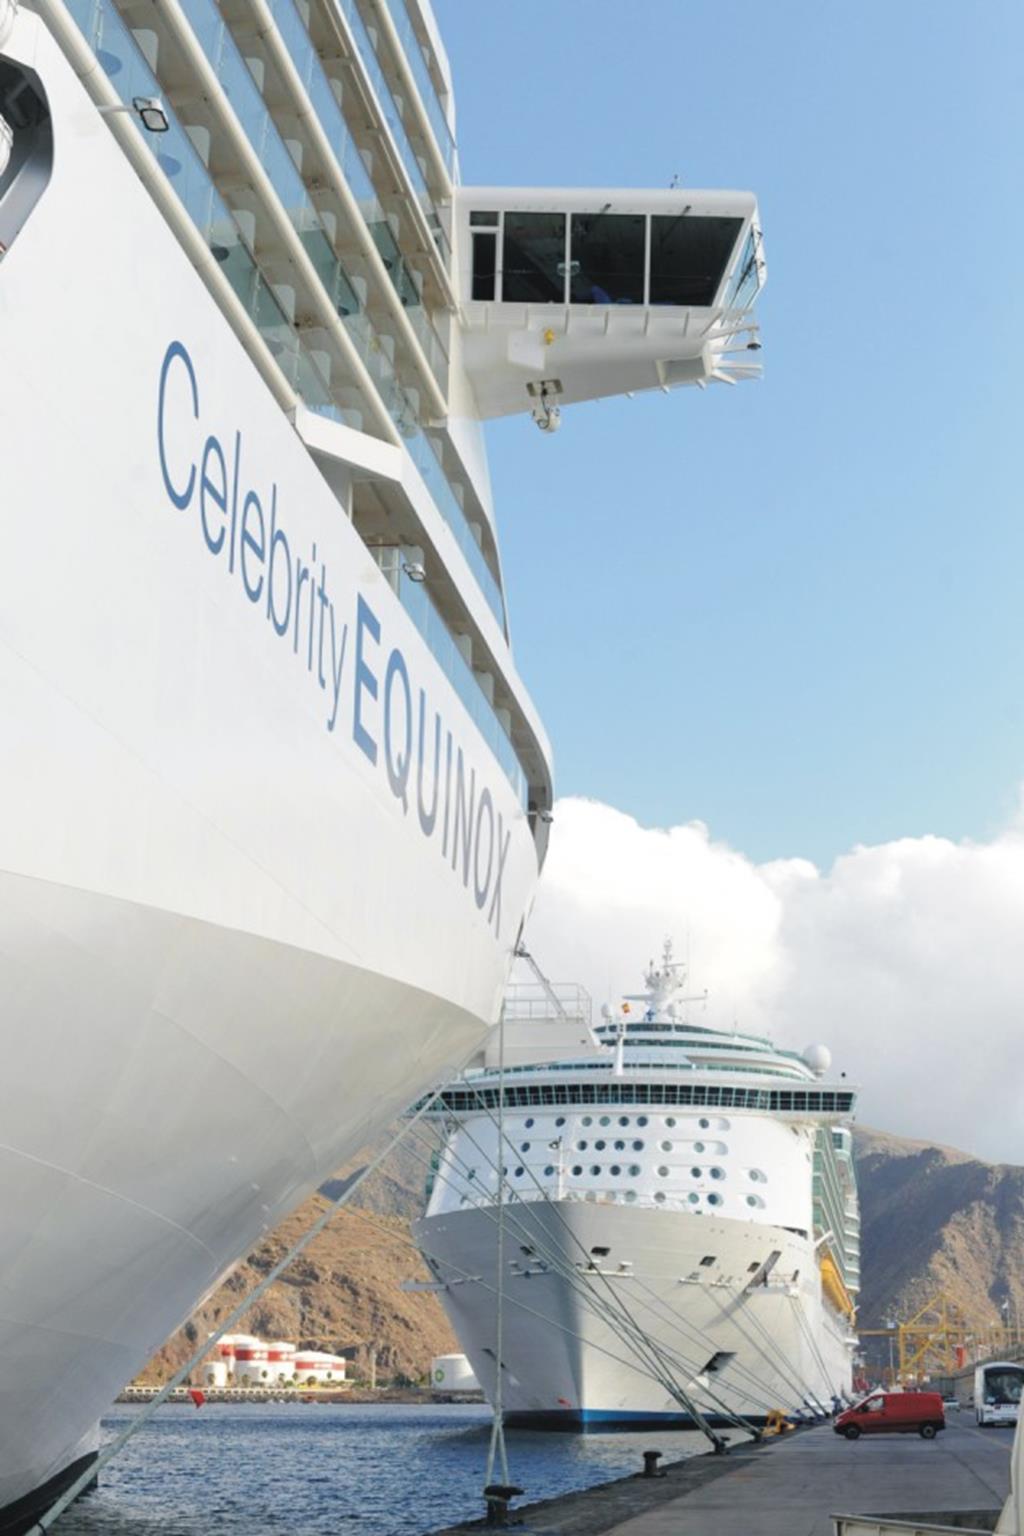 THE CRUISE SHIP TERMINAL OF THE PORT OF SANTA CRUZ DE TENERIFE, OPERATIONAL IN 2015 By the cruise season 2015-2016, the port of Santa Cruz de Tenerife will have a new cruise ship terminal that will